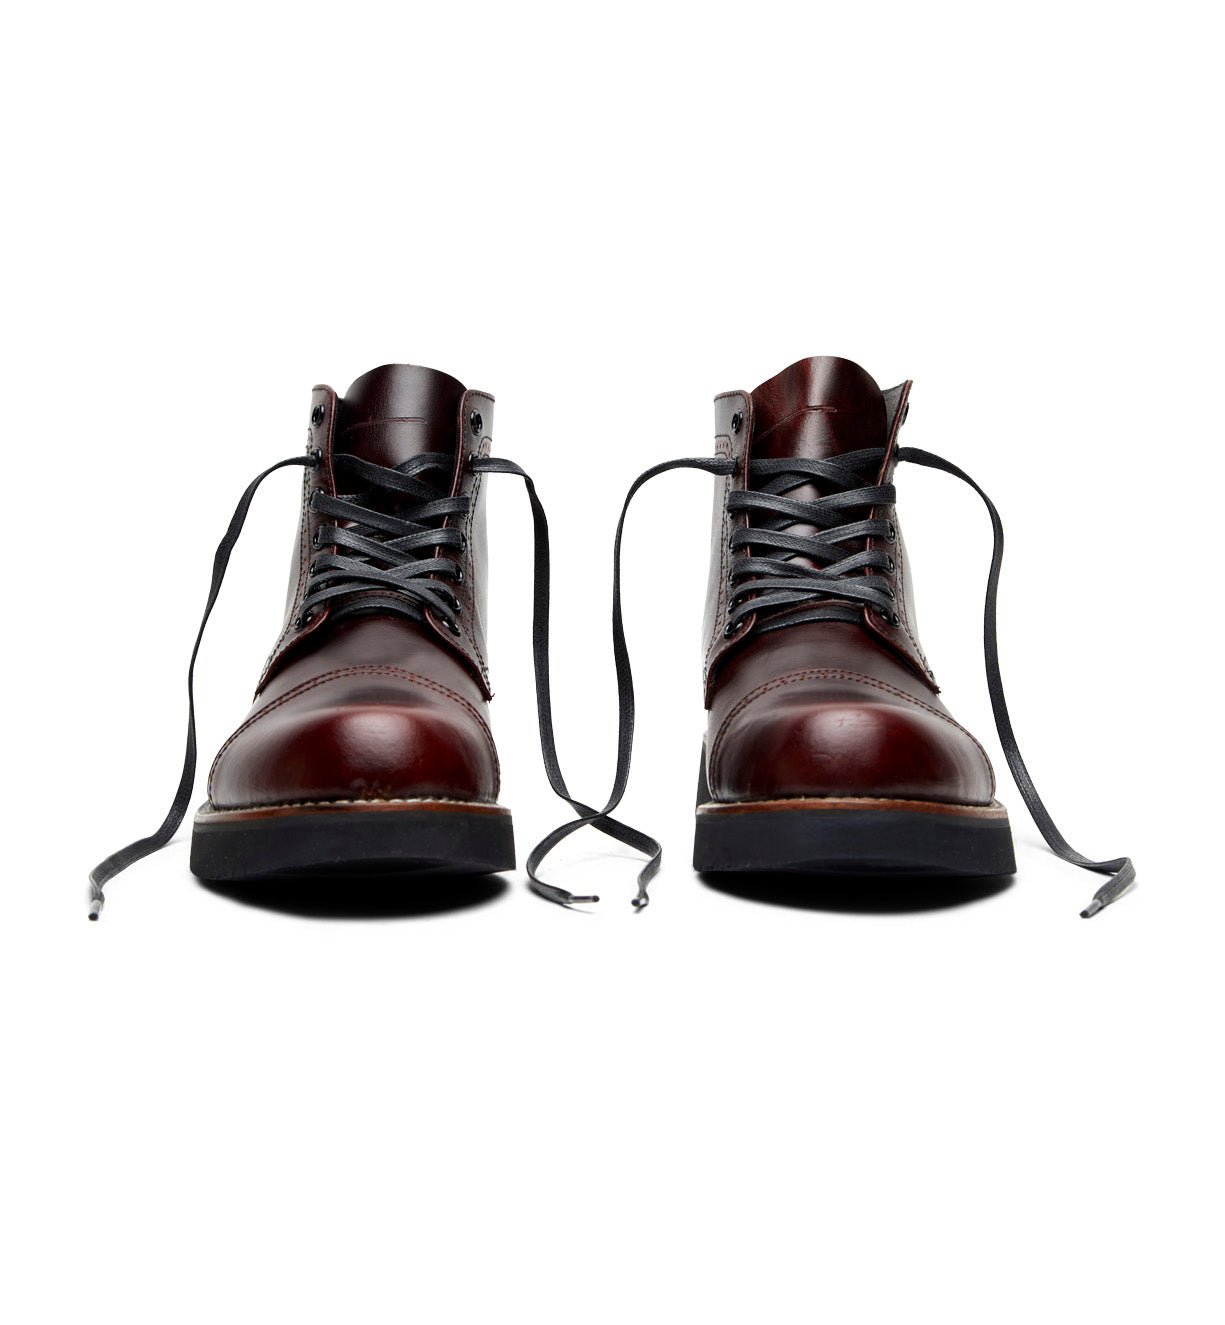 A pair of classic Aaron burgundy leather boots by Broken Homme on a white background.